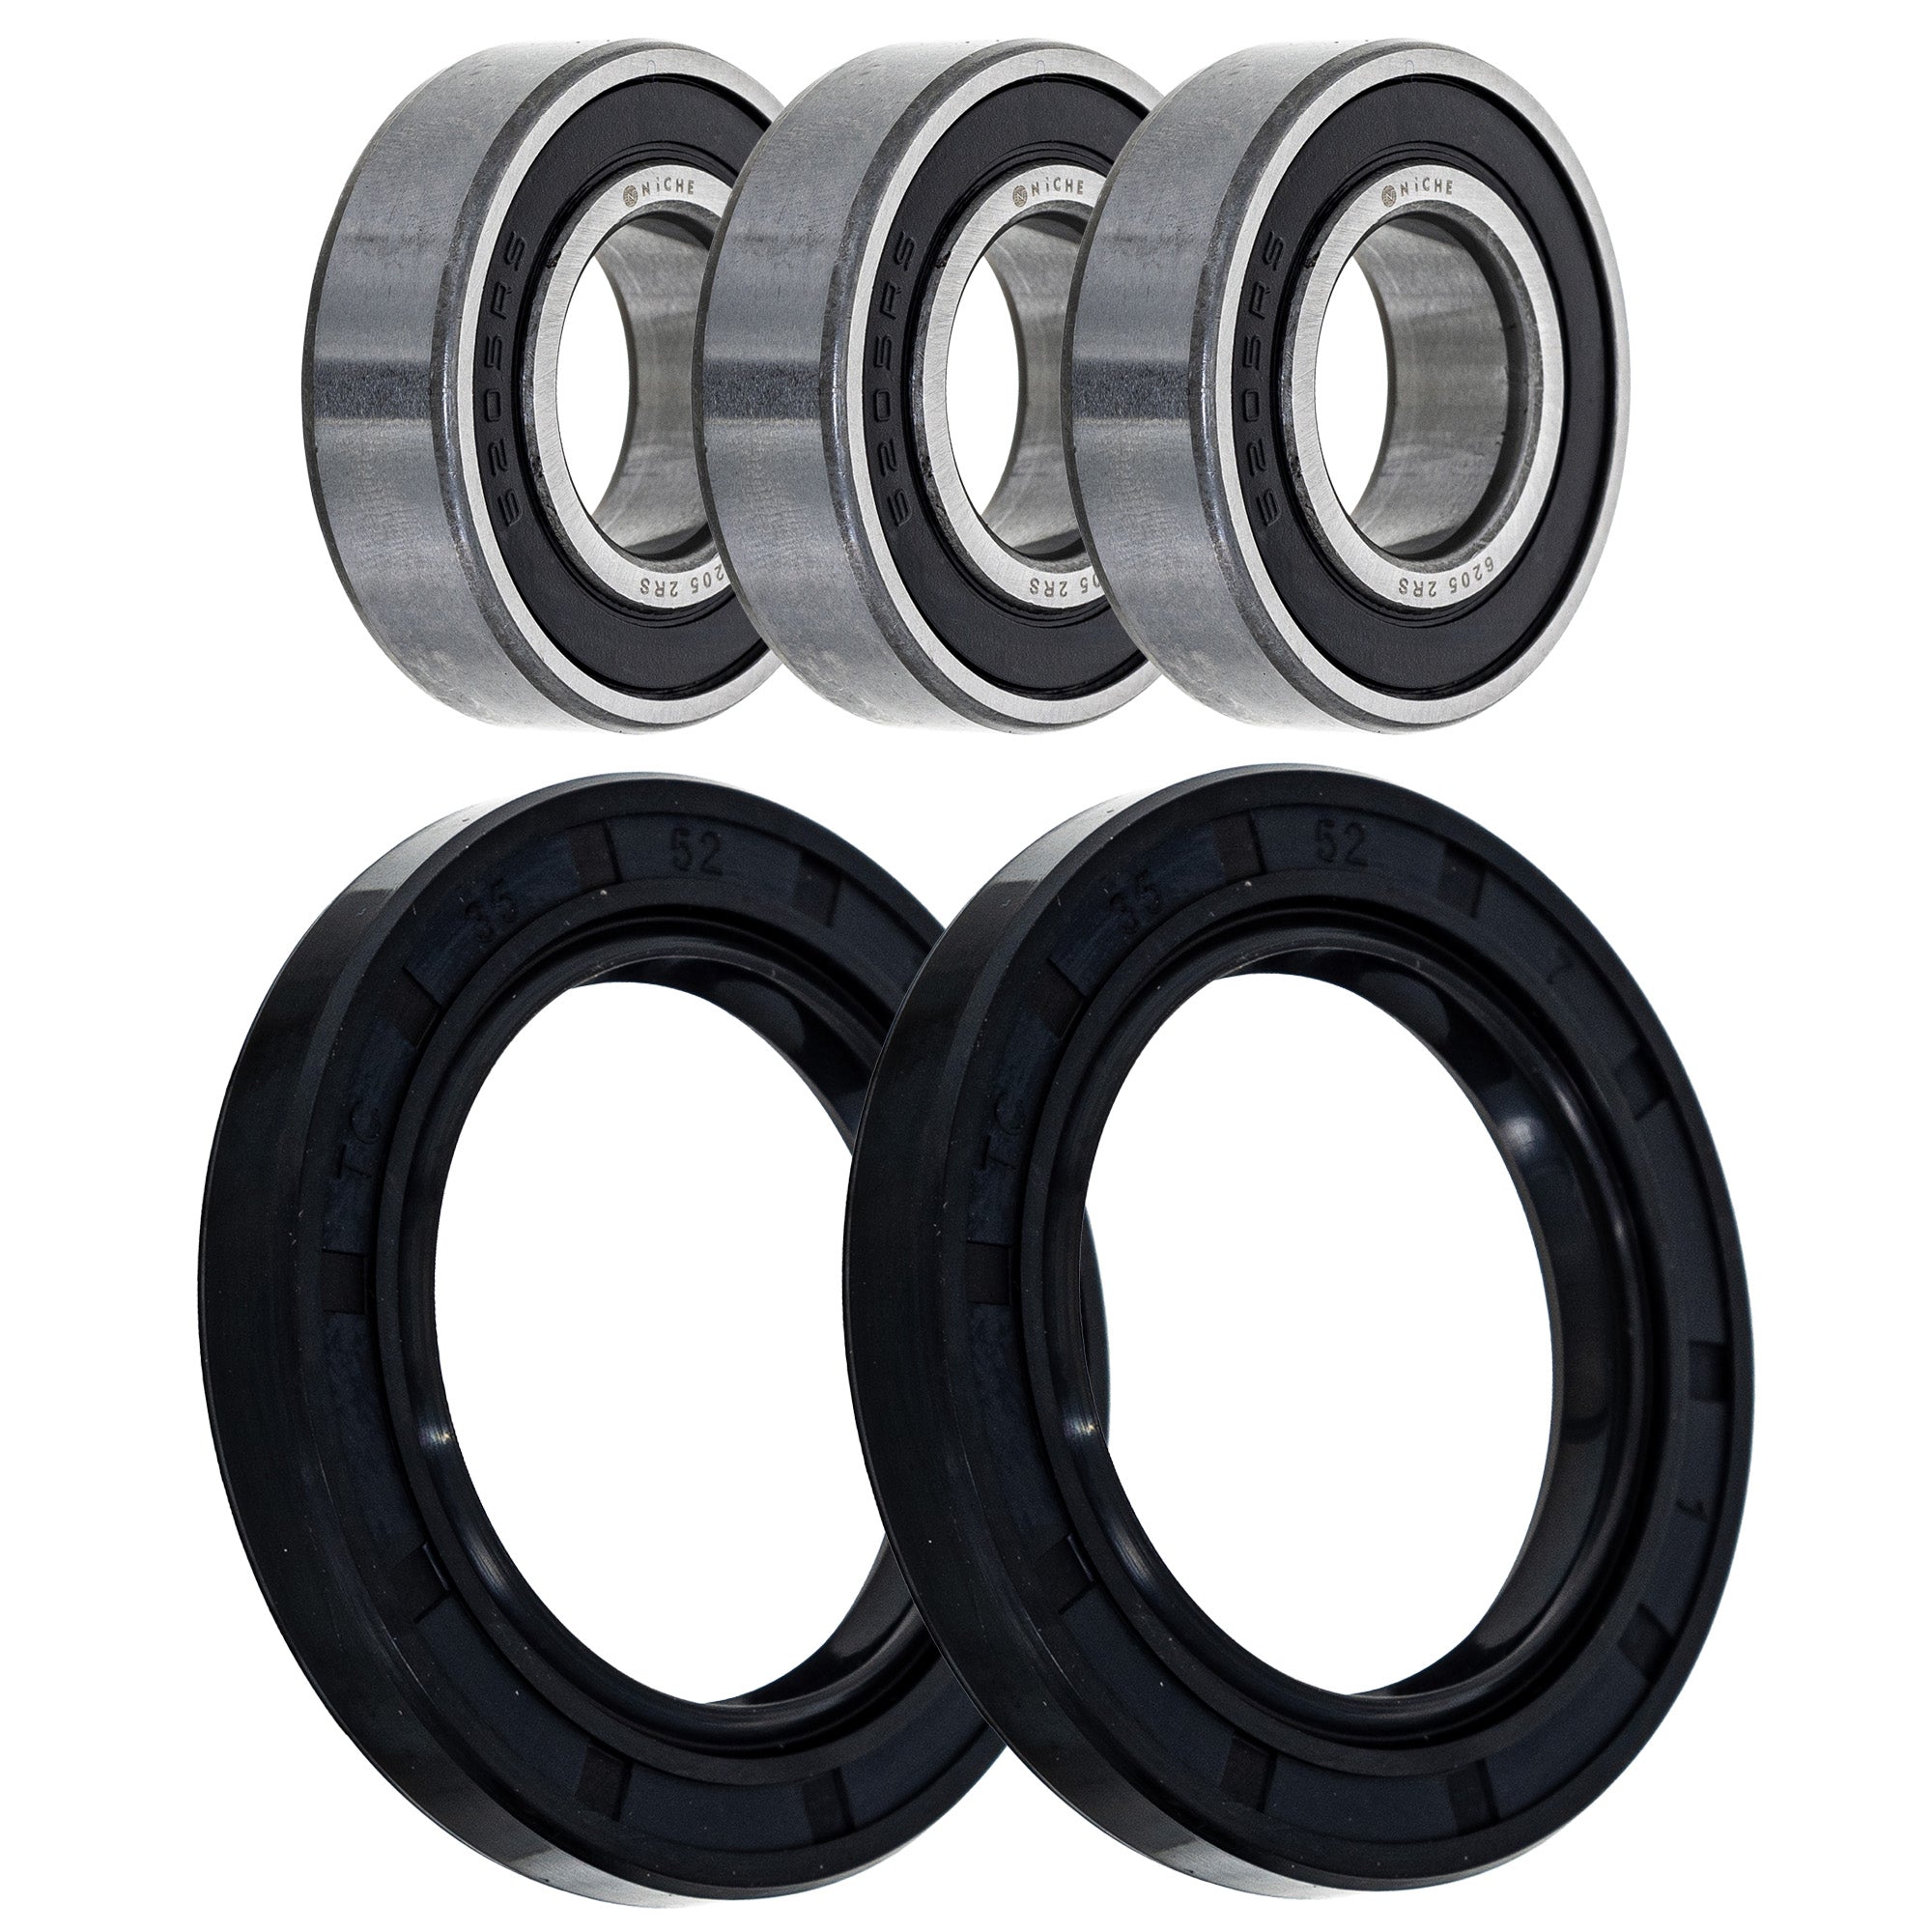 Wheel Bearing Seal Kit for zOTHER Ref No KH400 NICHE MK1009139